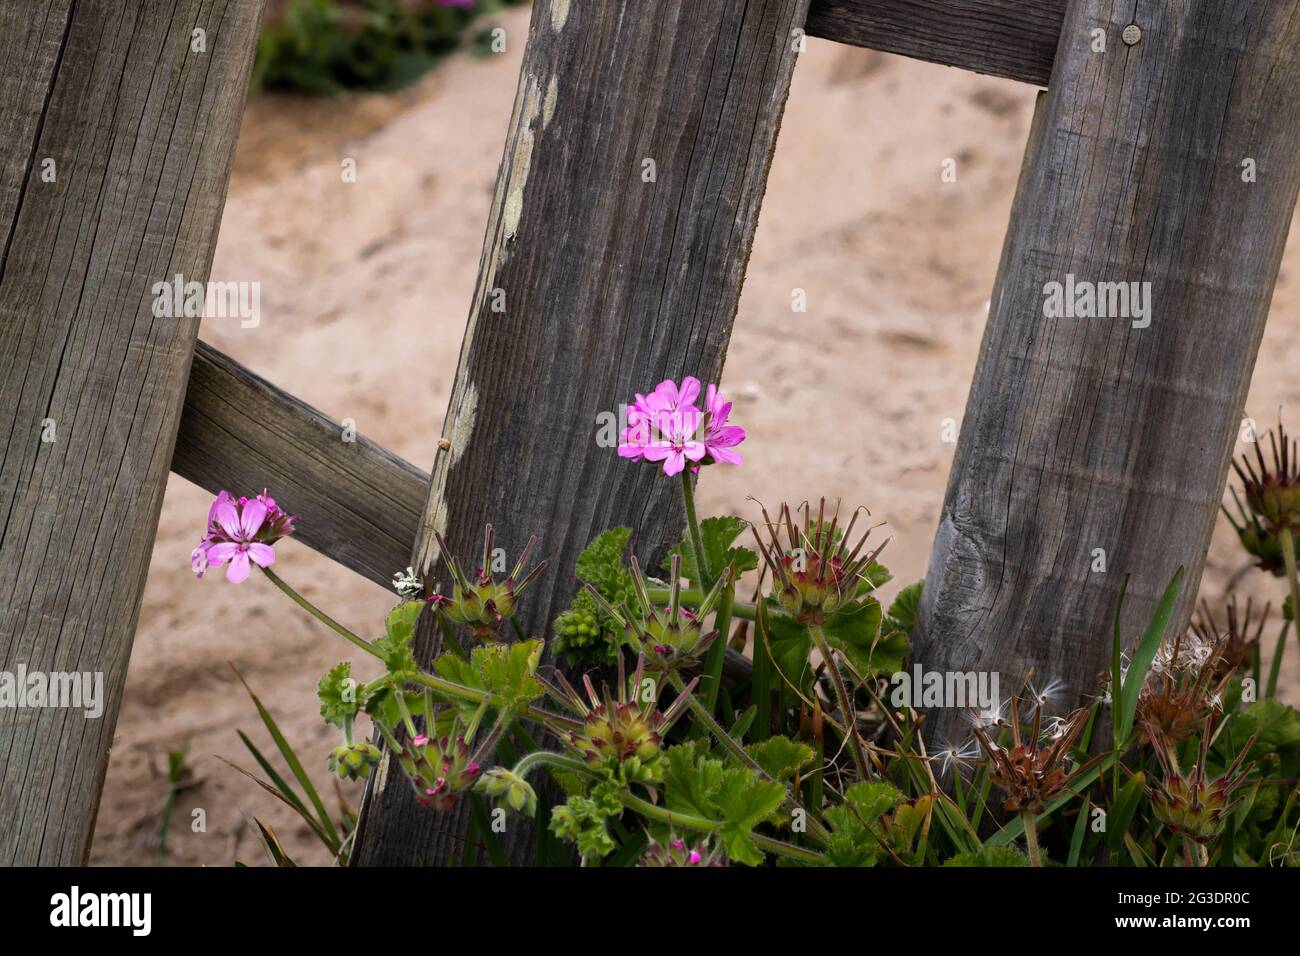 Cluster of pink mediterranean stork's bill flowers or erodium malacoides growing by a wooden fence on a sandy dune in the Portuguese coast Stock Photo